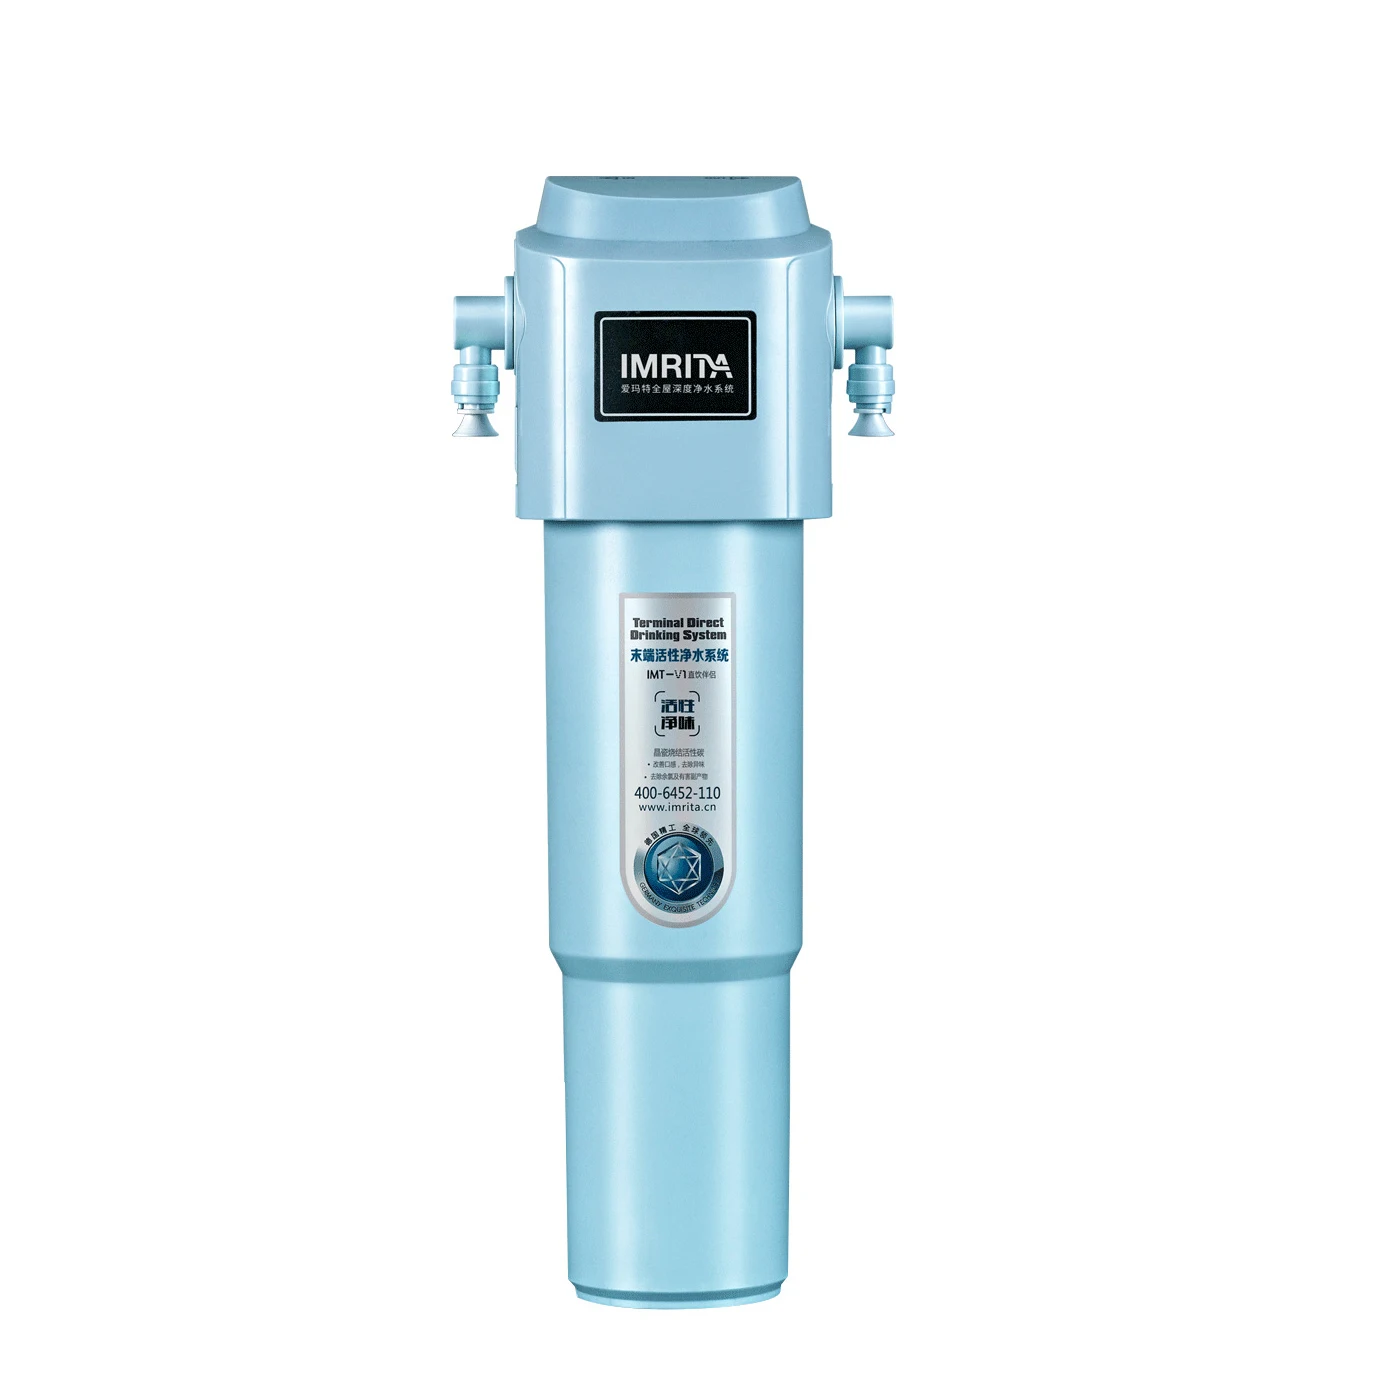 

IMRITA Filtre a Eau Under Sink 1 Stage Activated Carbon Water Filter System Household Water Purifier